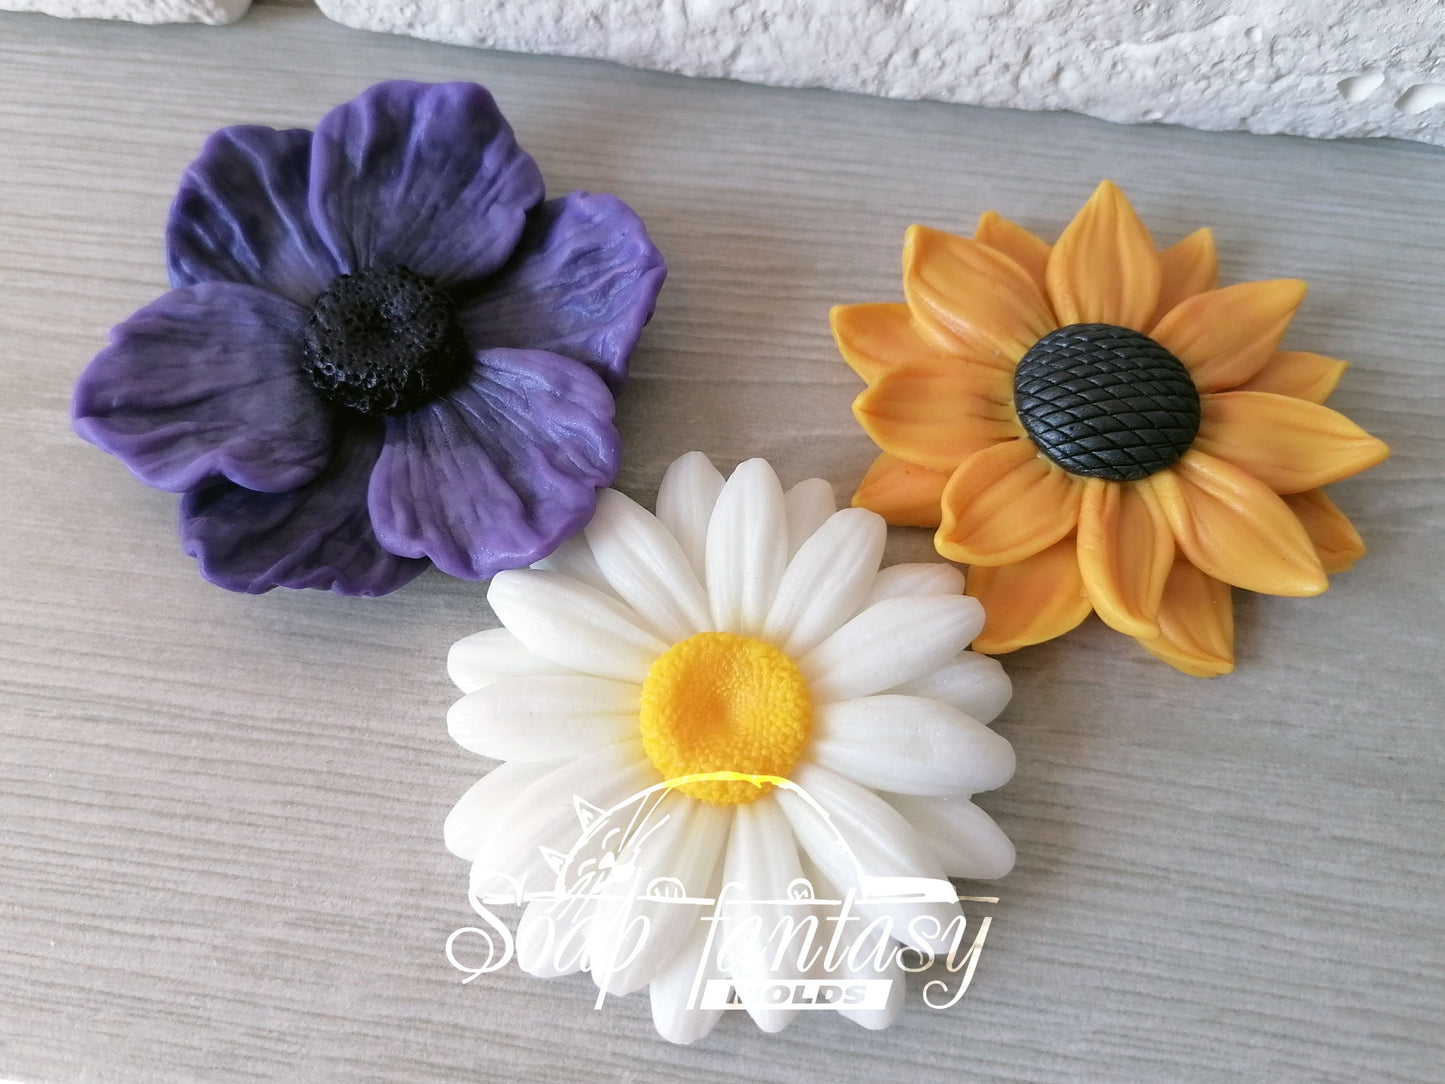 Daisy flower (very simple) silicone mold for soap making